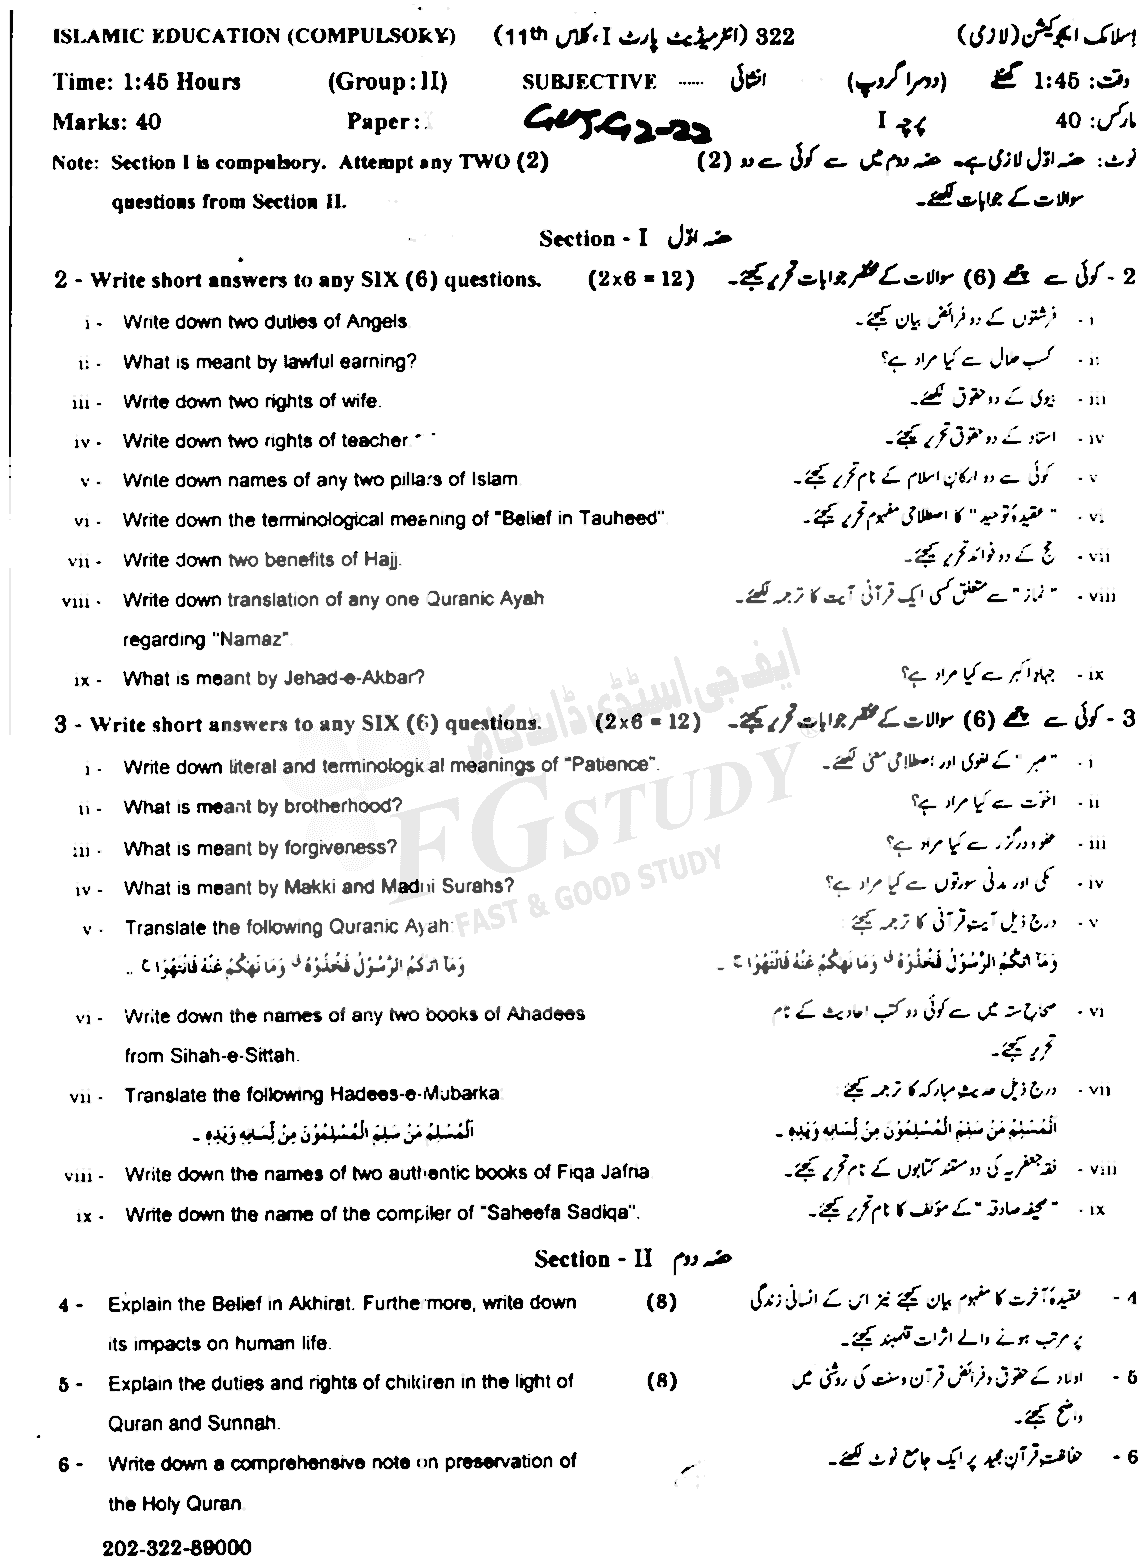 11th Class Islamic Education Past Paper 2022 Gujranwala Board Group 2 Subjective